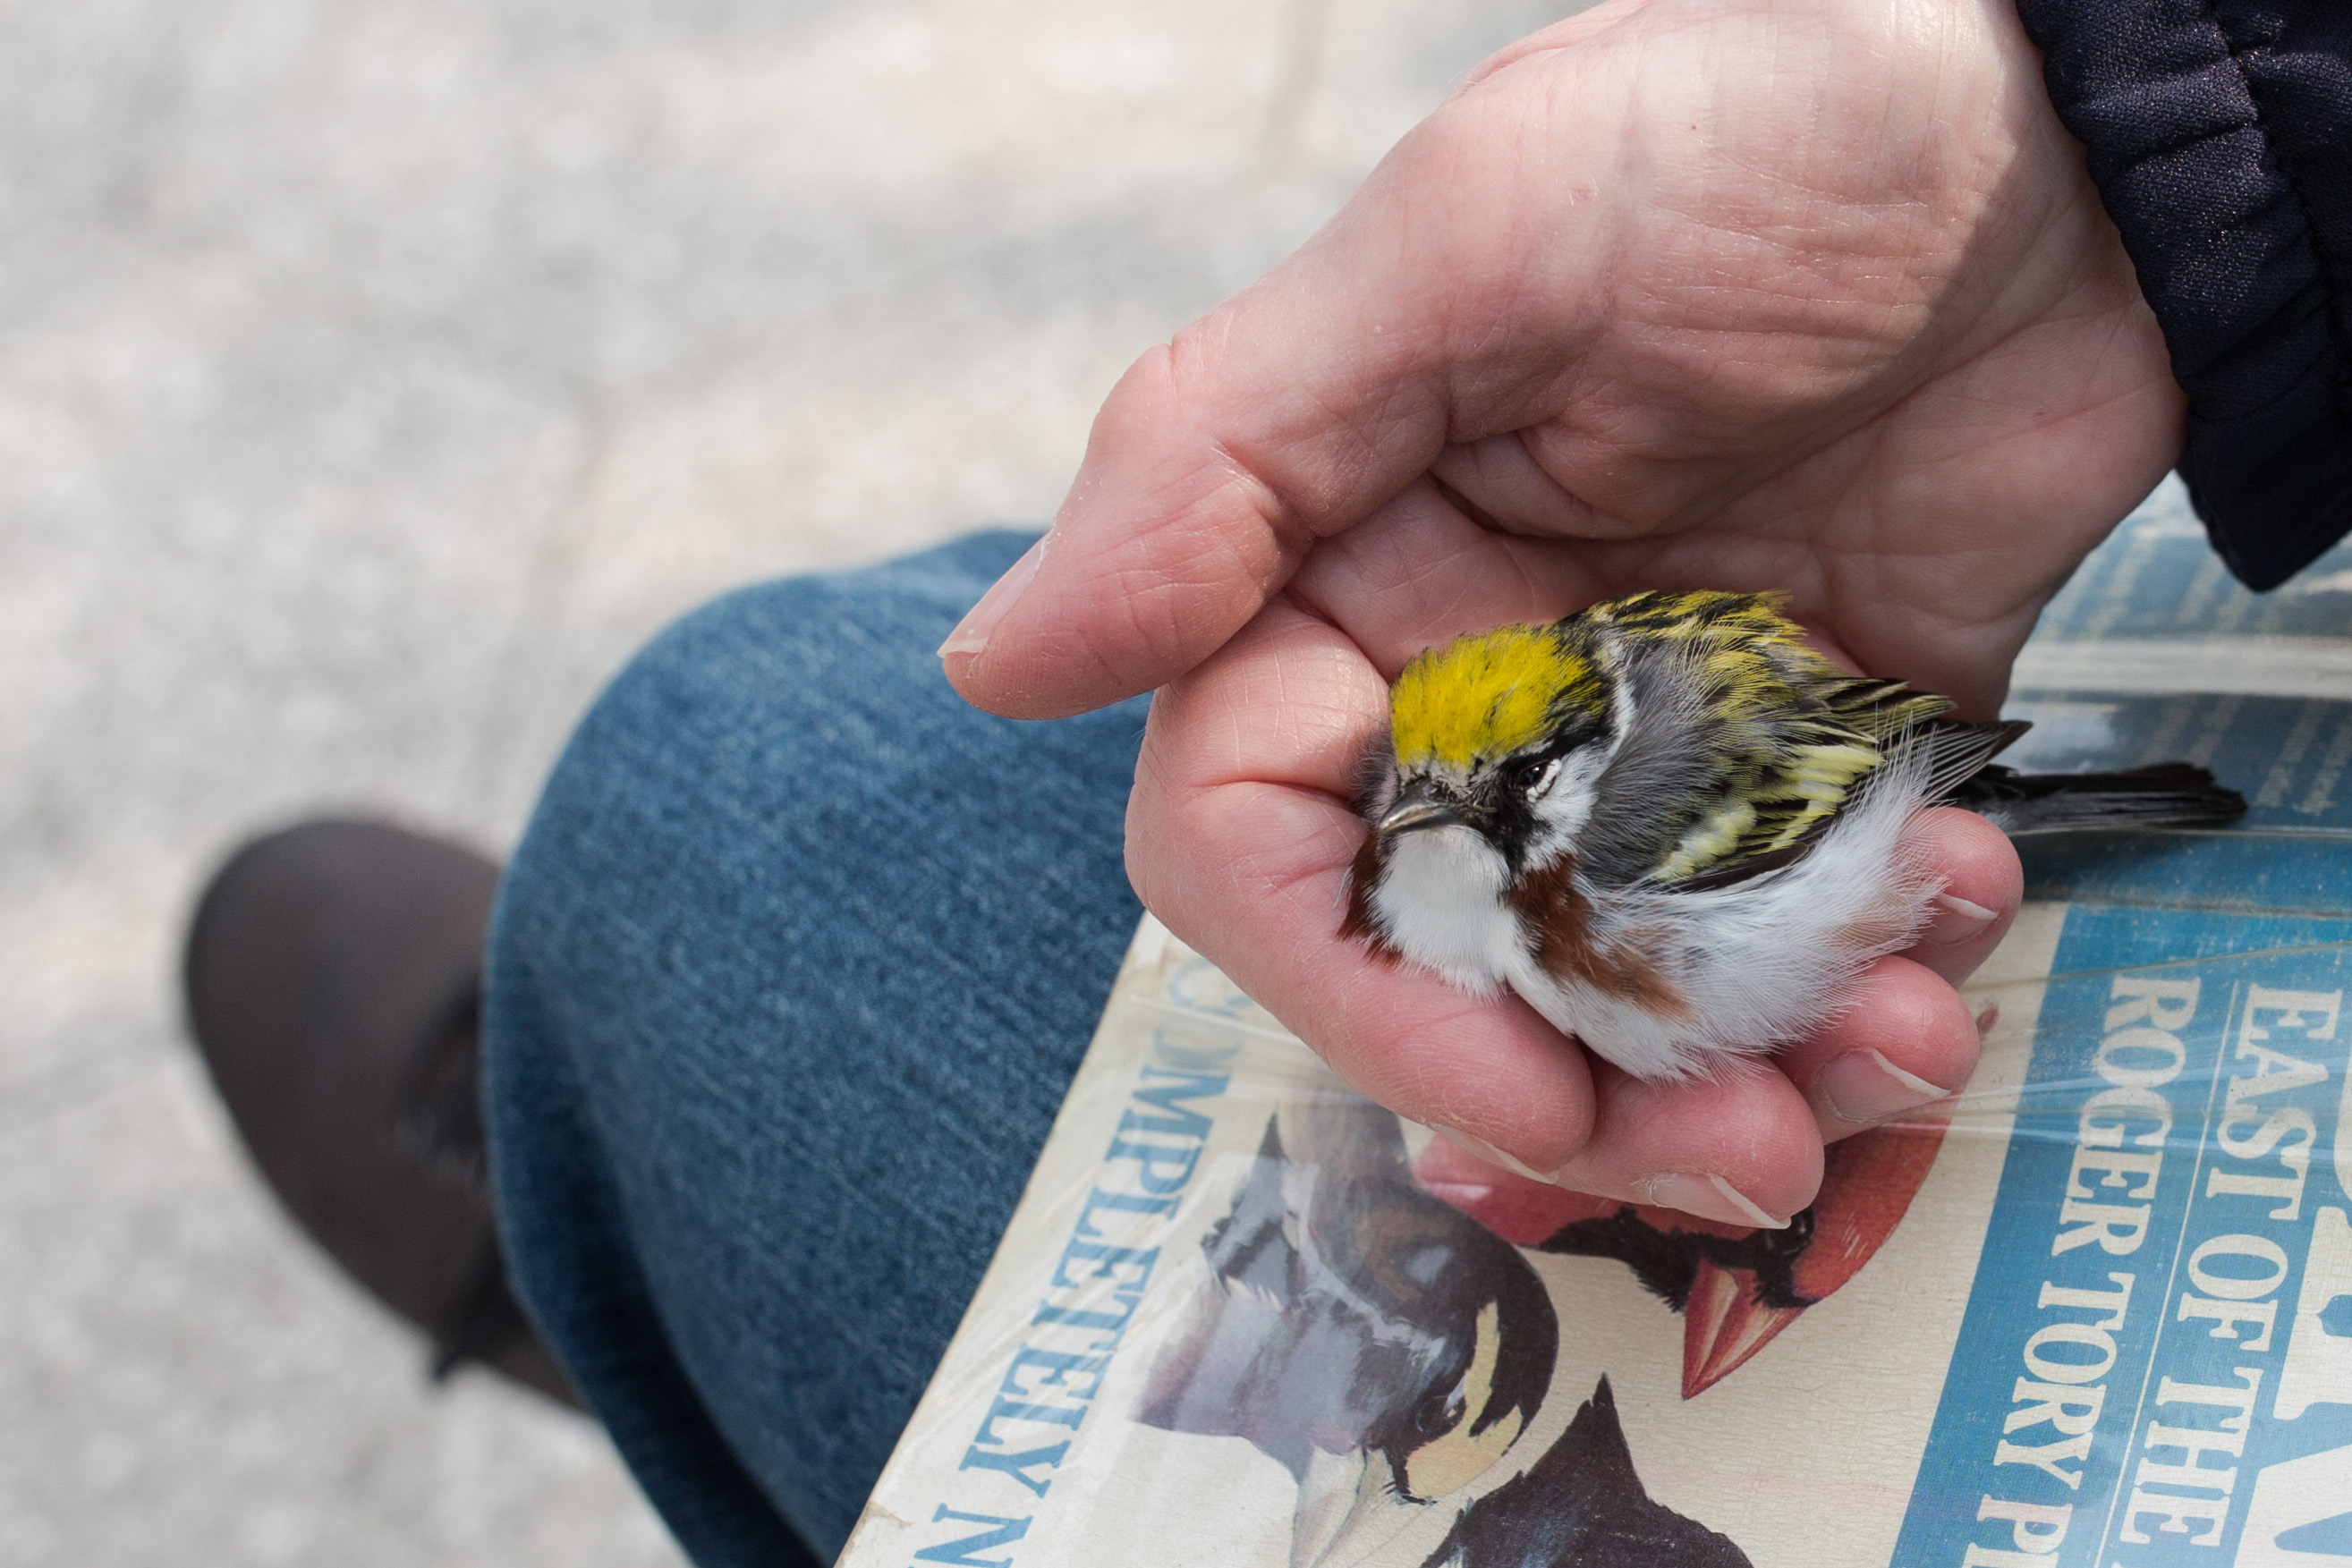 A stunned Chestnut-sided Warbler rests in the hand of a Project Safe Flight volunteer. Photo: Sophie Butcher